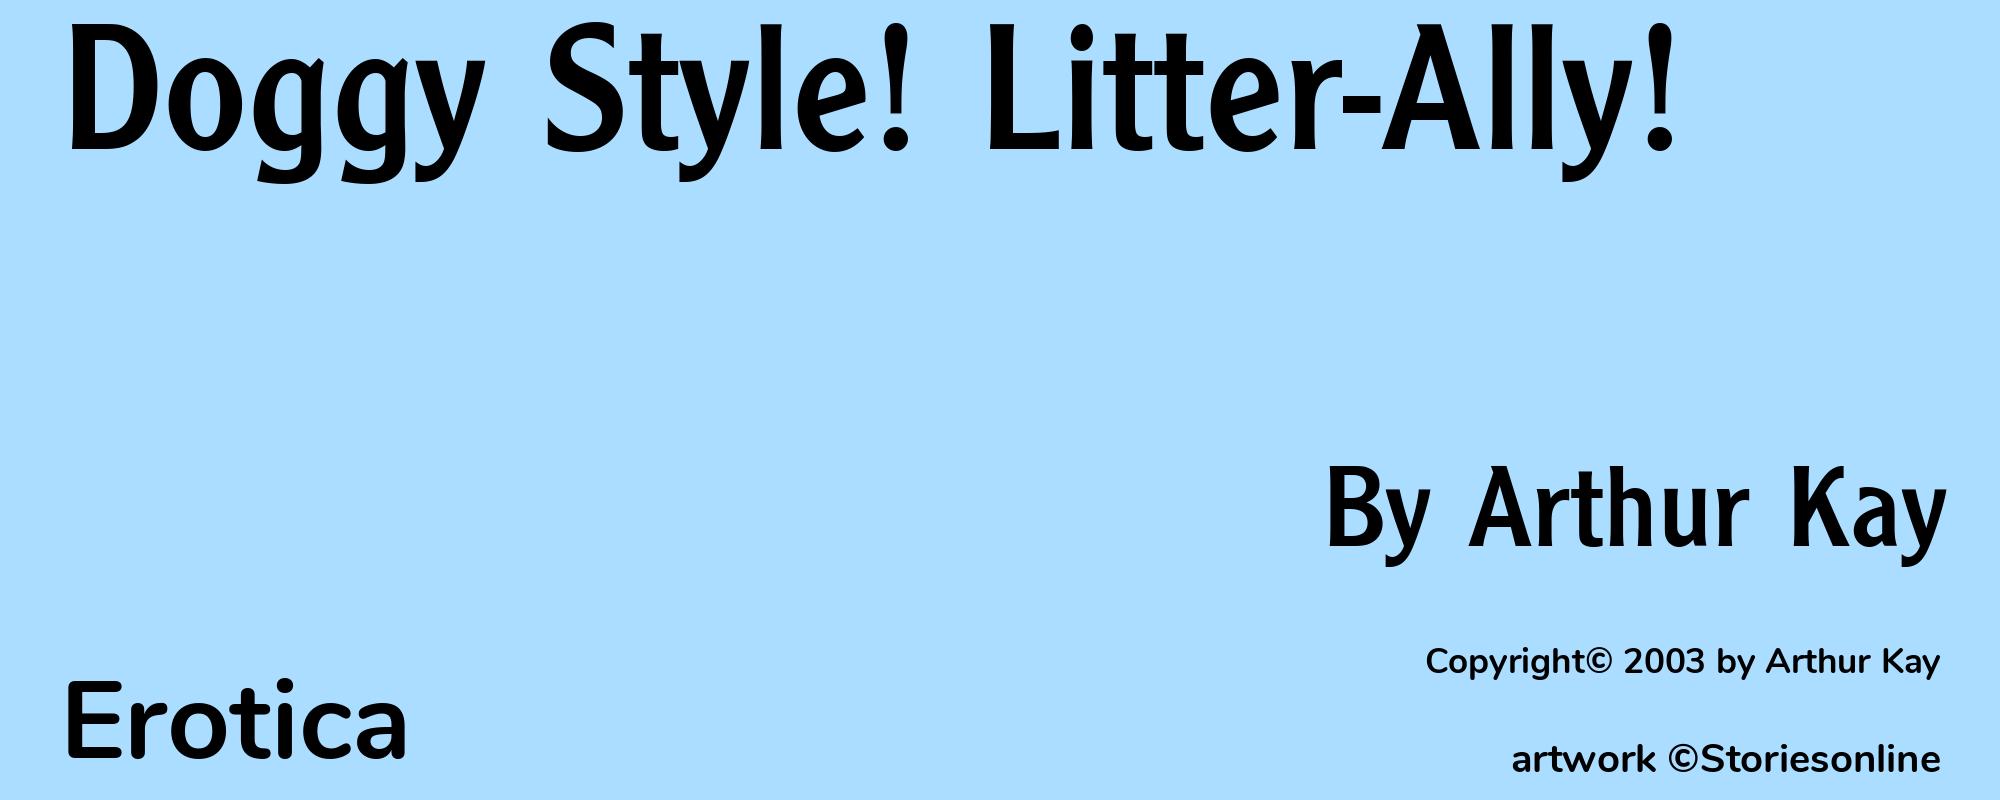 Doggy Style! Litter-Ally! - Cover